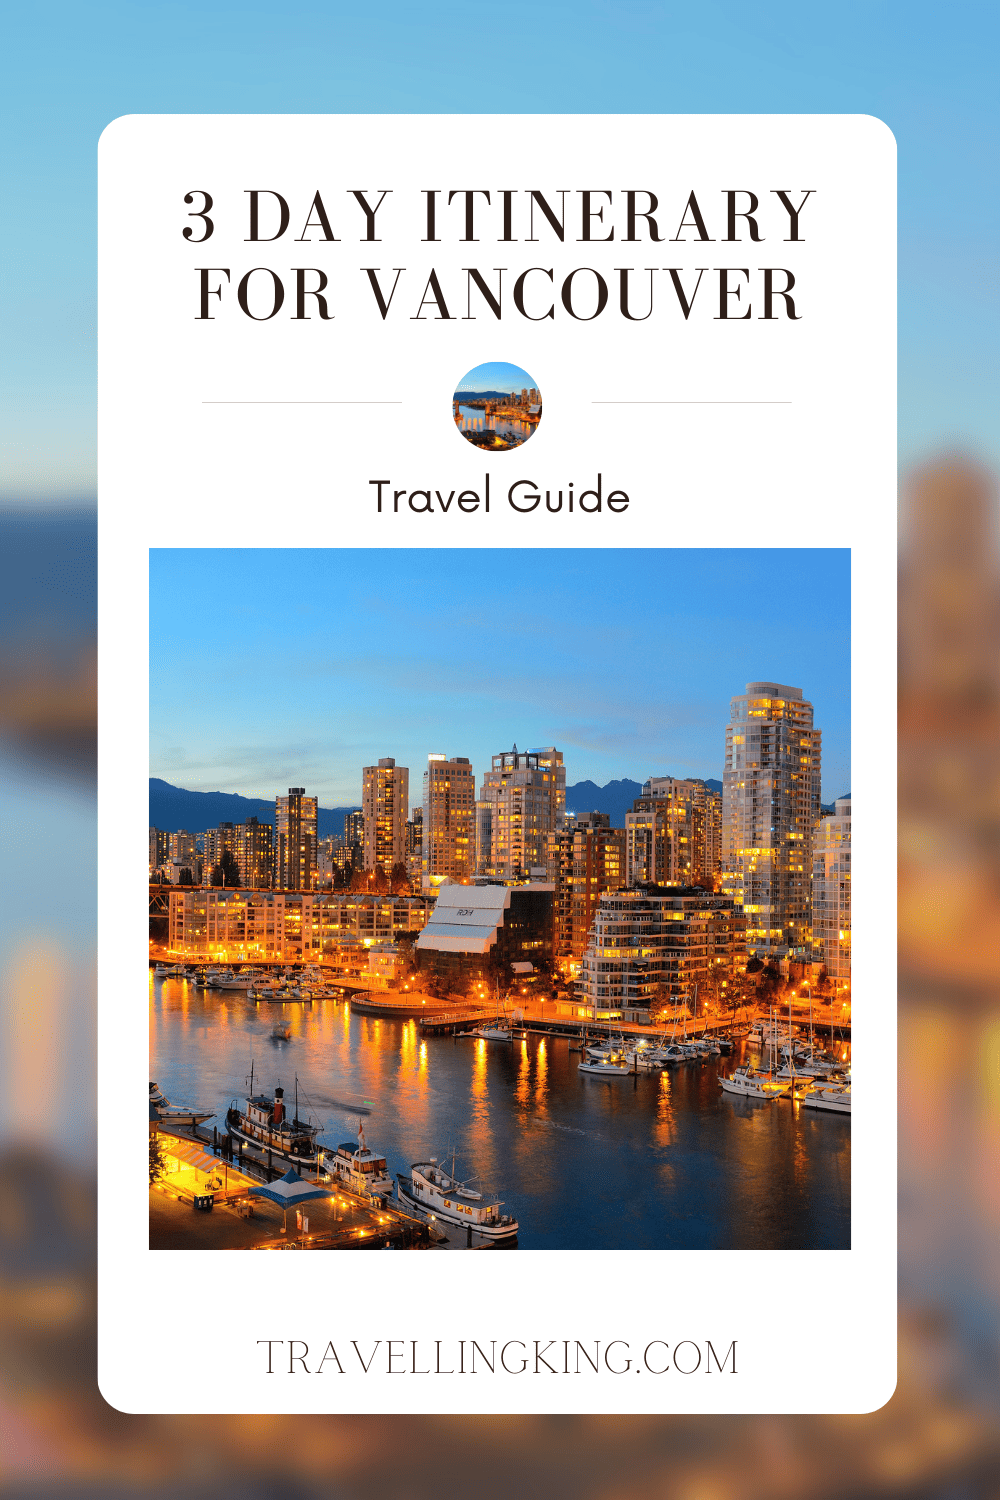 3 Day Itinerary For Vancouver